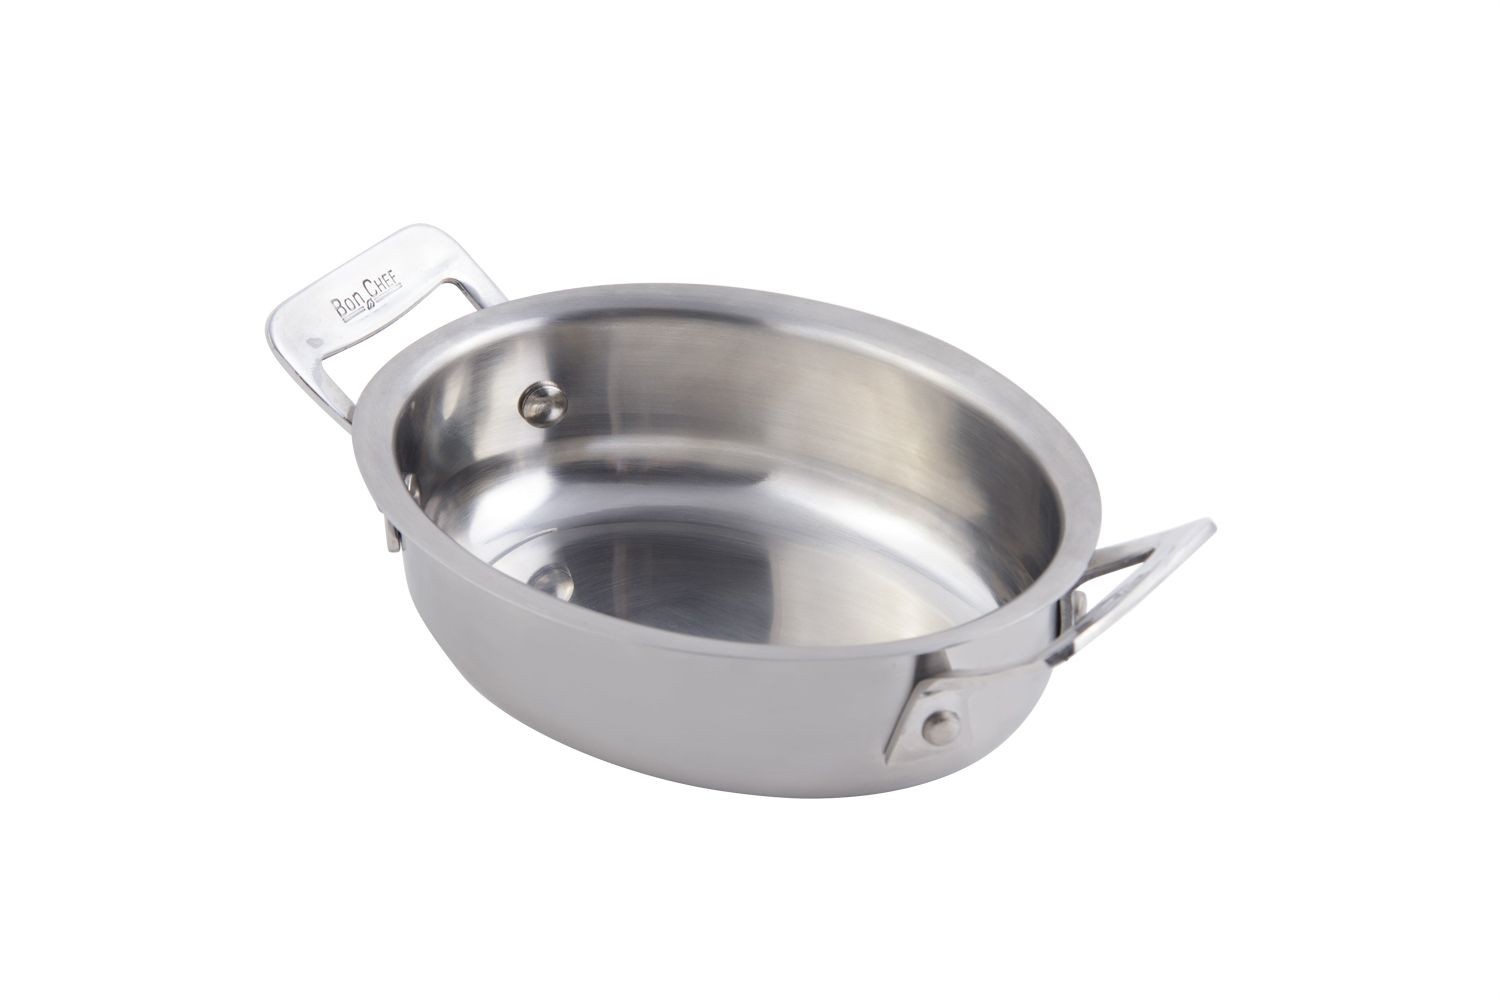 Bon Chef 60028 Cucina Stainless Steel Oval Dish, 24 oz.